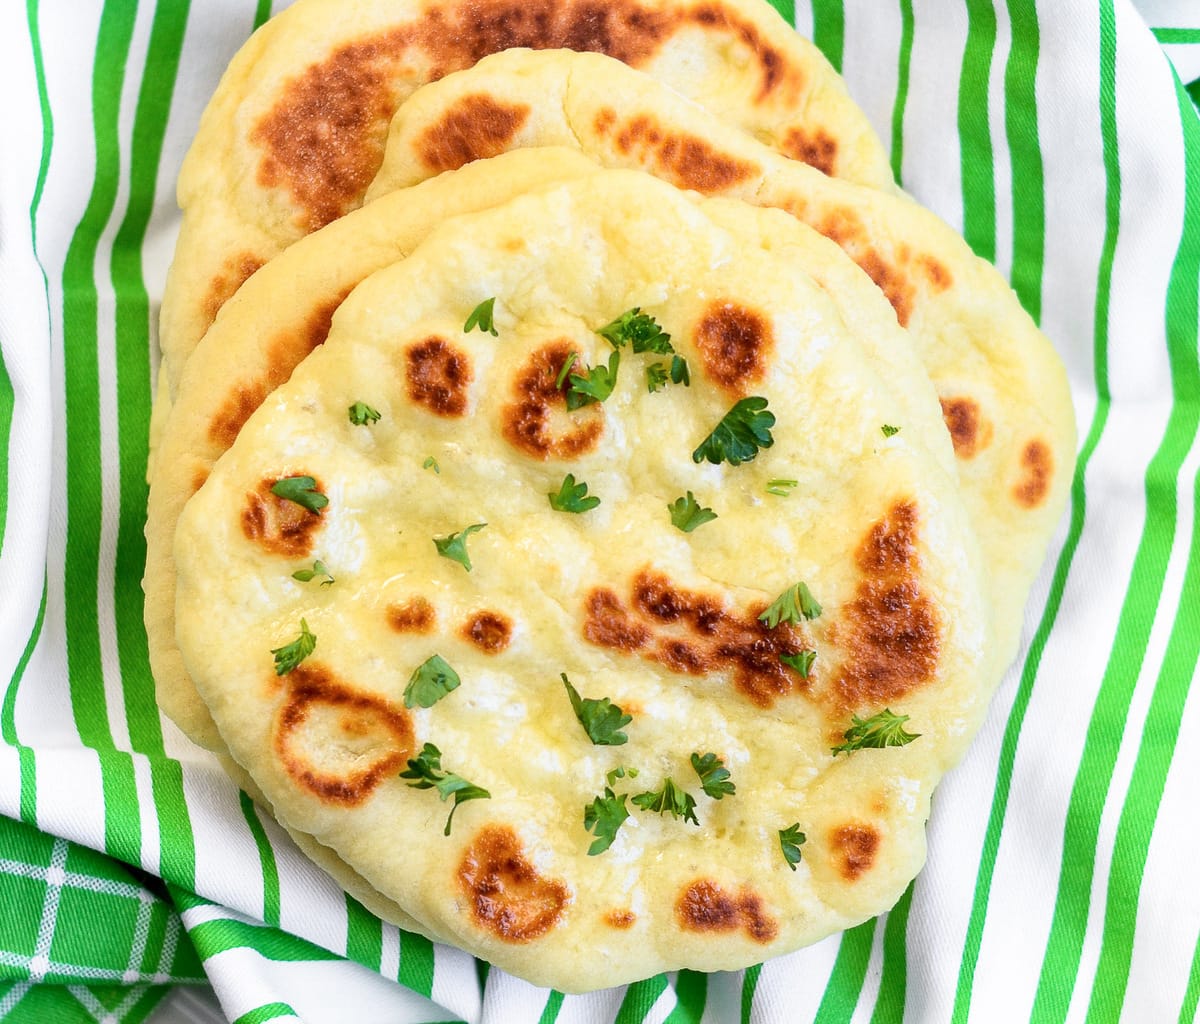 Yeast bread recipes - close up of homemade naan bread topped with fresh herbs.